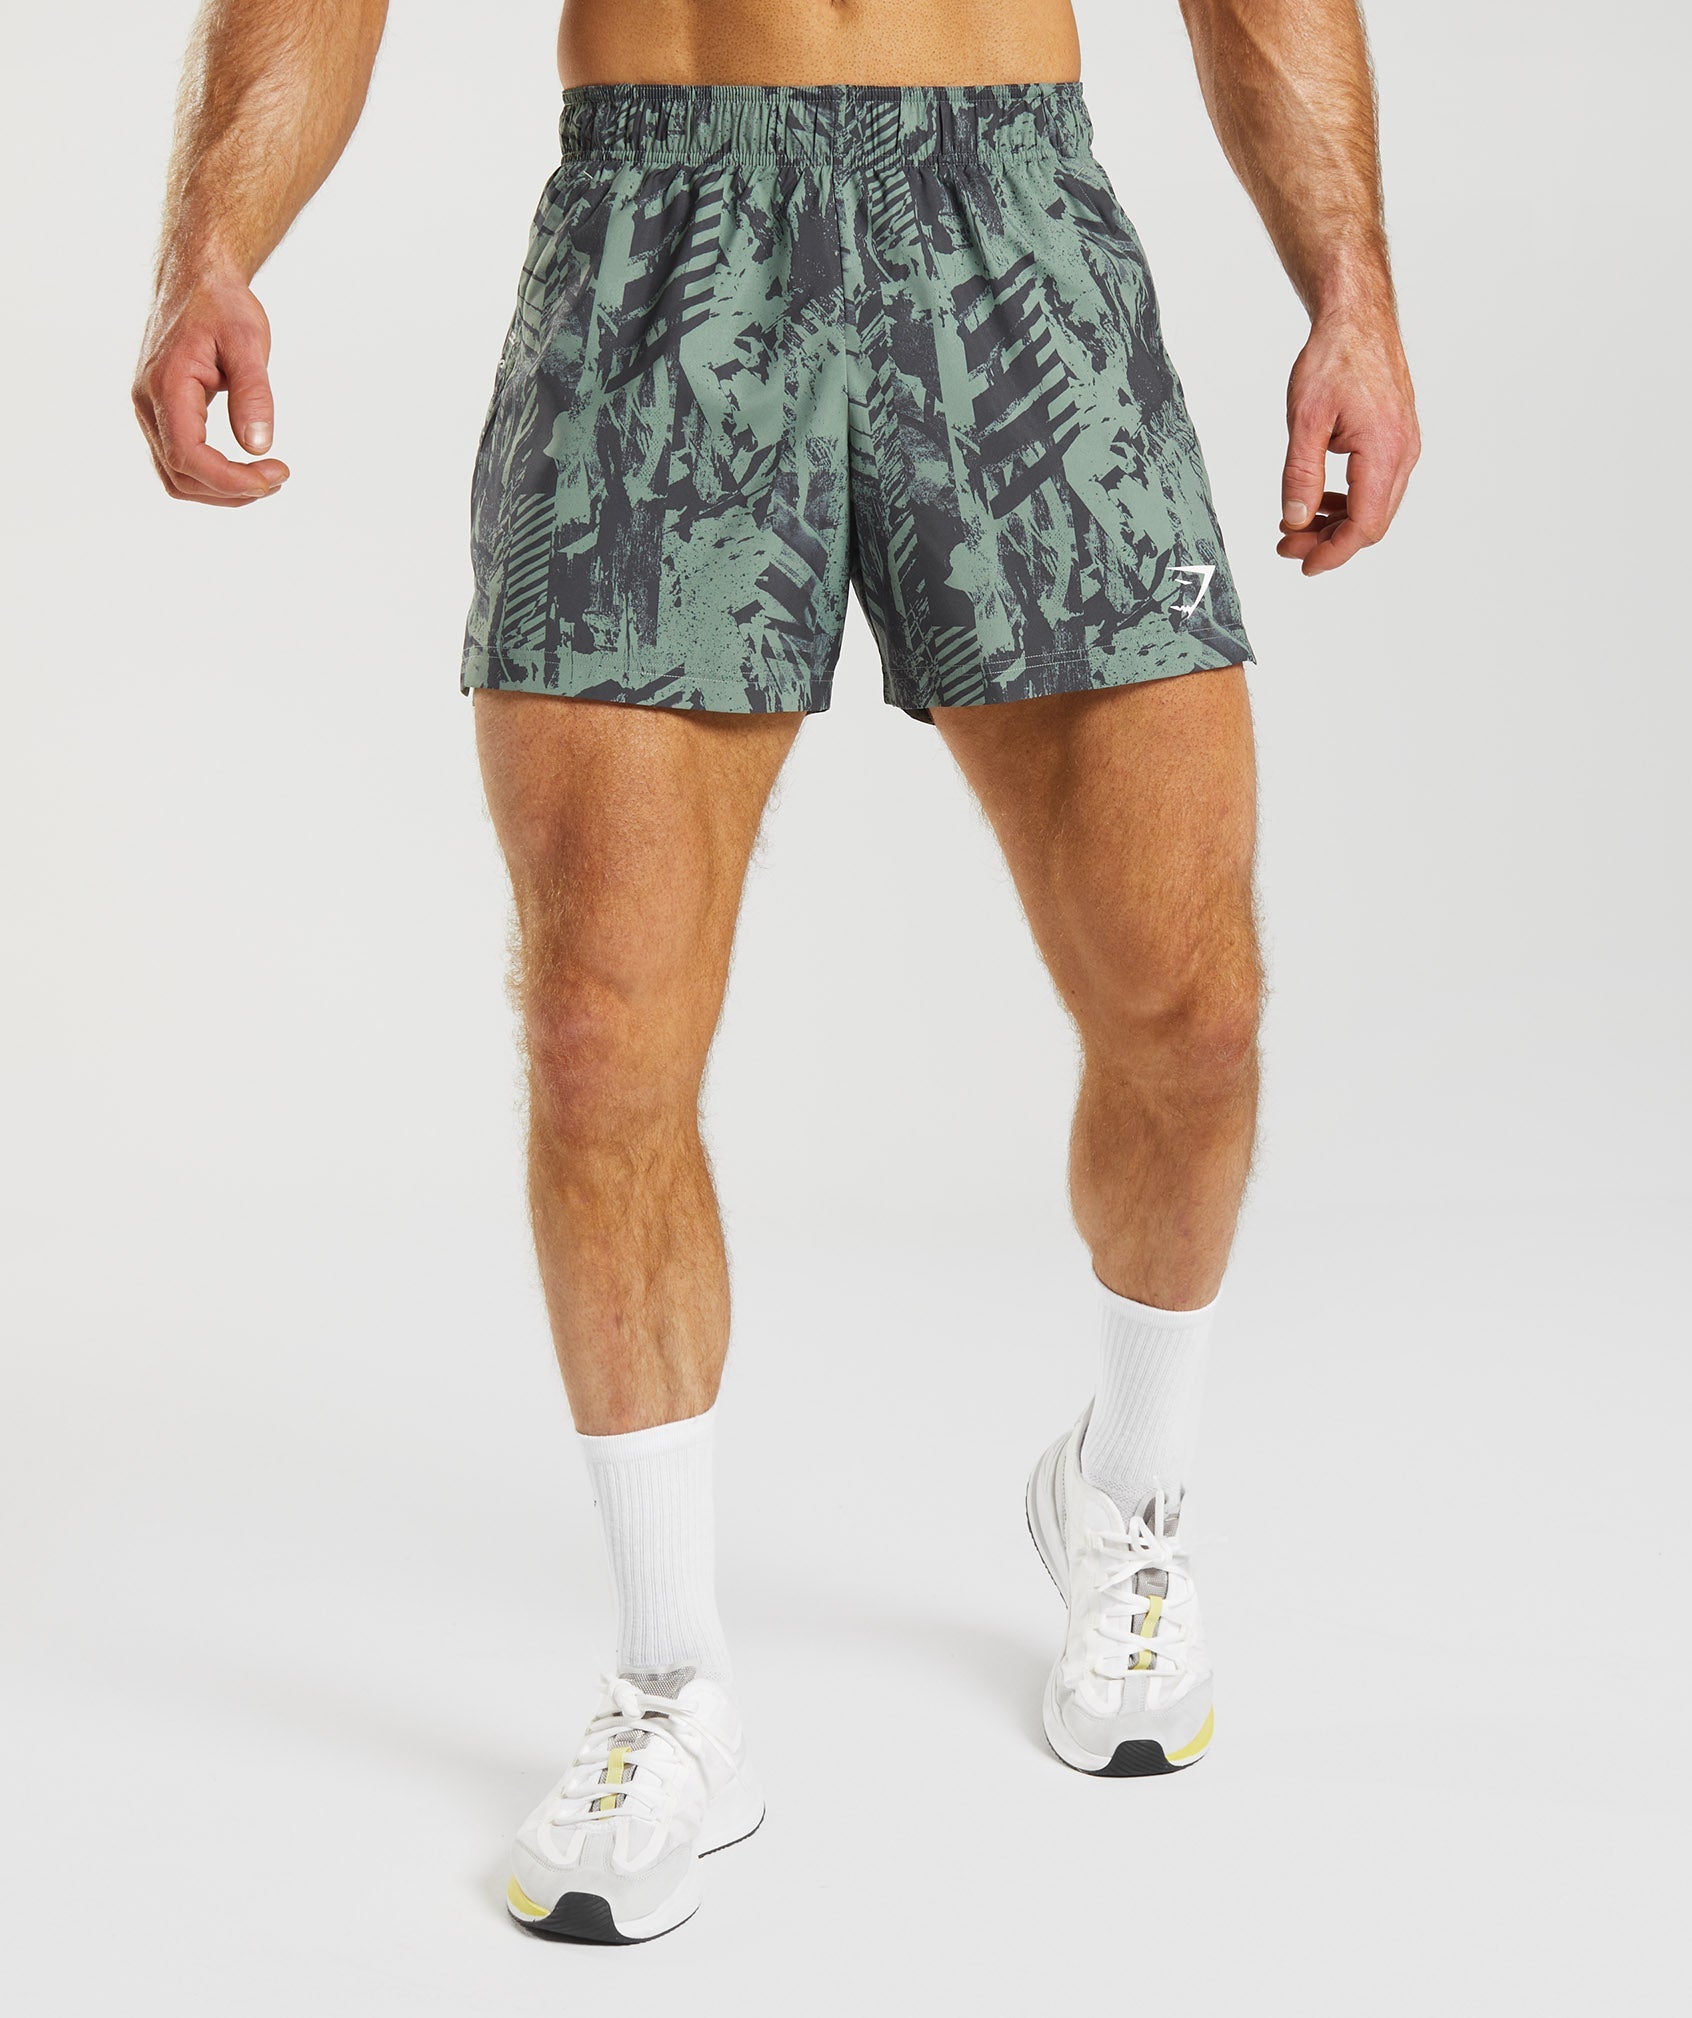 Sport 5" Shorts in Willow Green Print - view 1